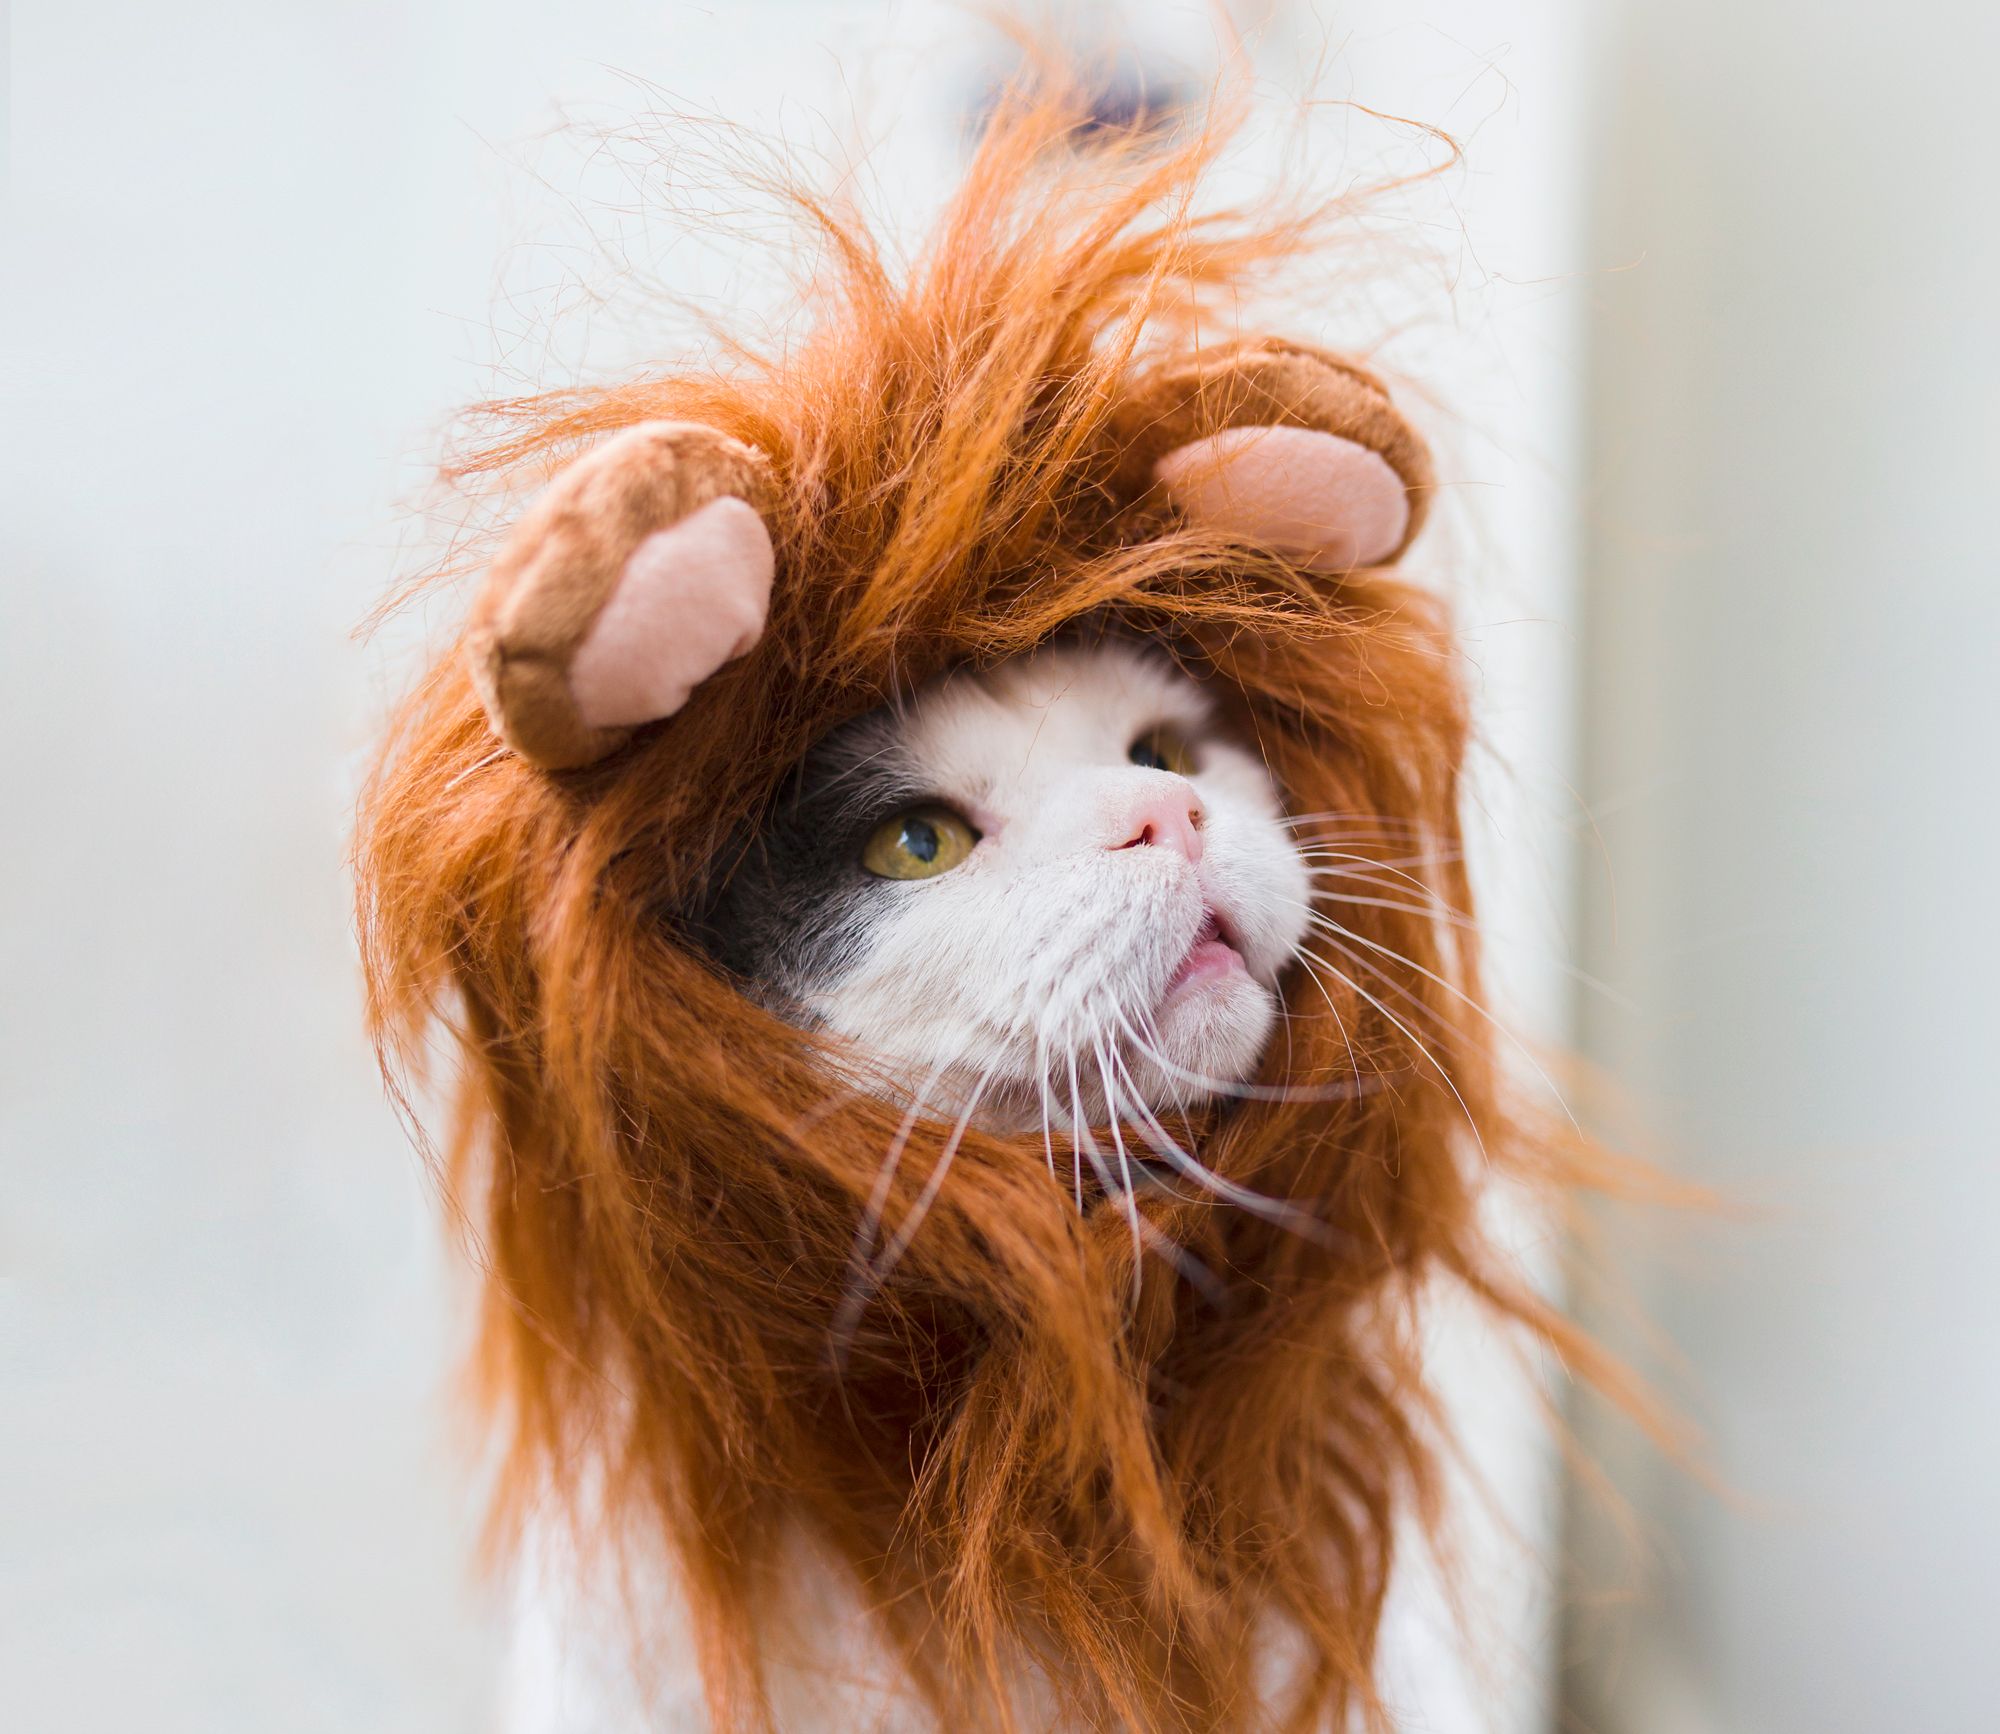 20 Best Cat Halloween Costumes For 2021 - Funny Cat Costume Ideas